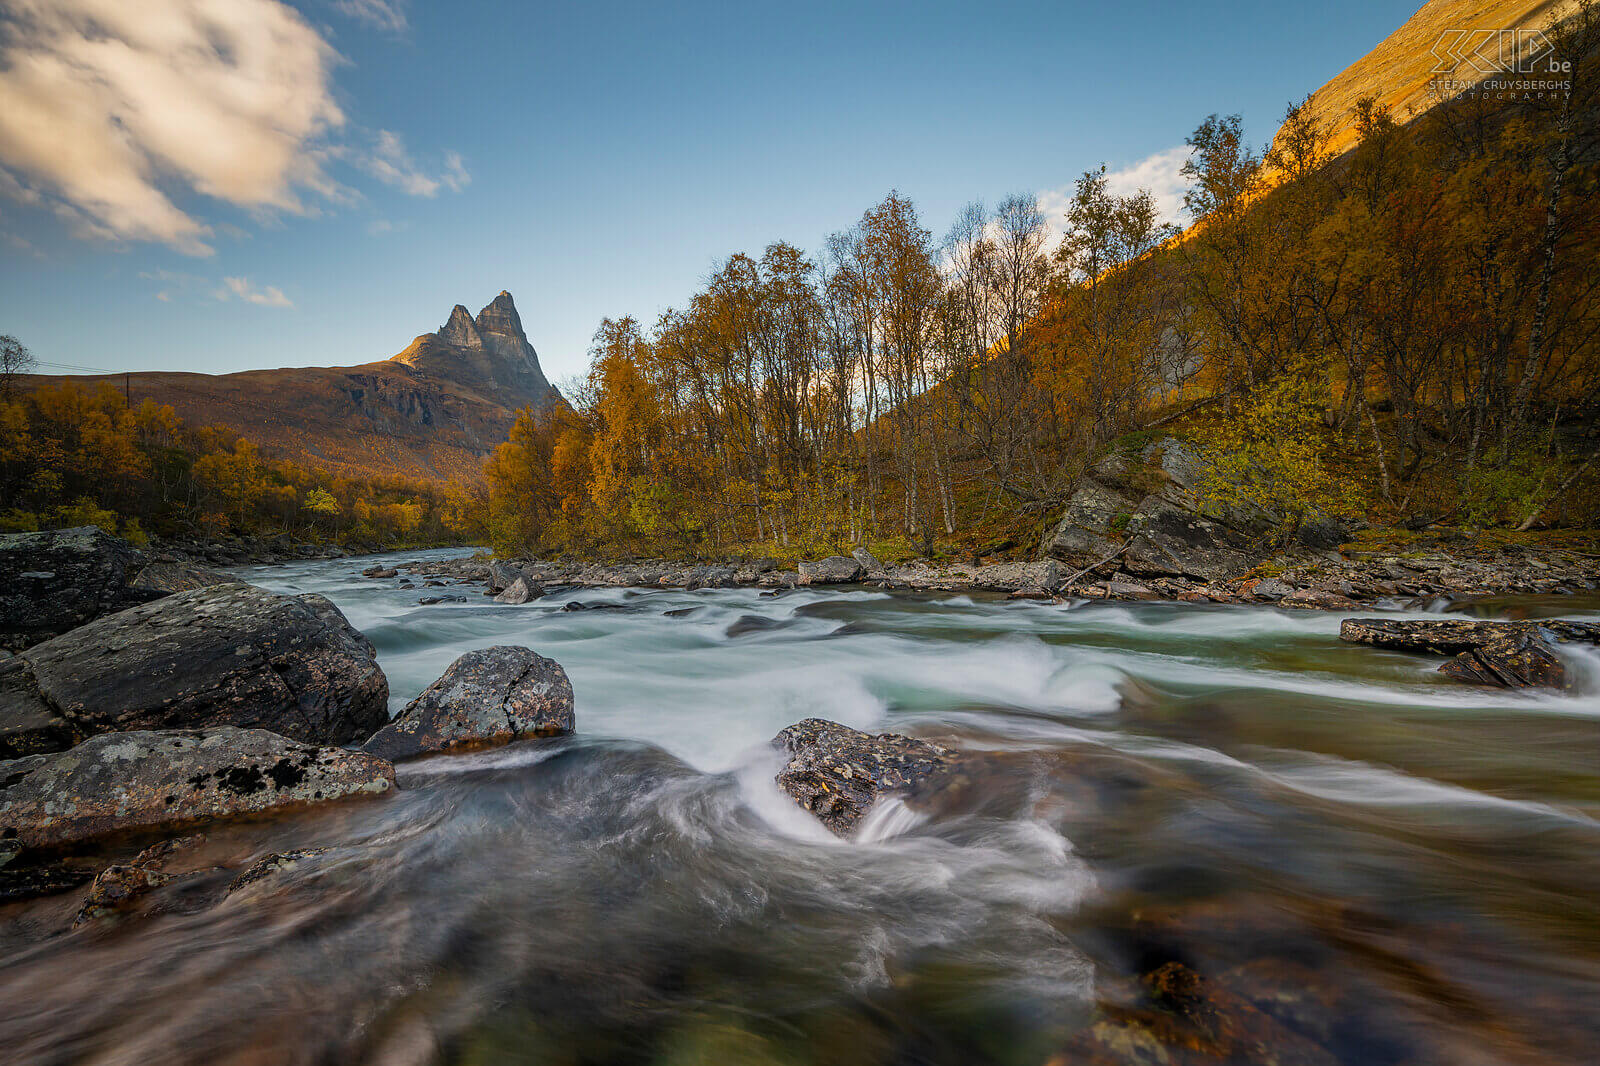 Oteren - Otertinden - Signaldalelva Autumn at its best at the Signaldalelva river with the mountain peaks of the Otertinden. Stefan Cruysberghs